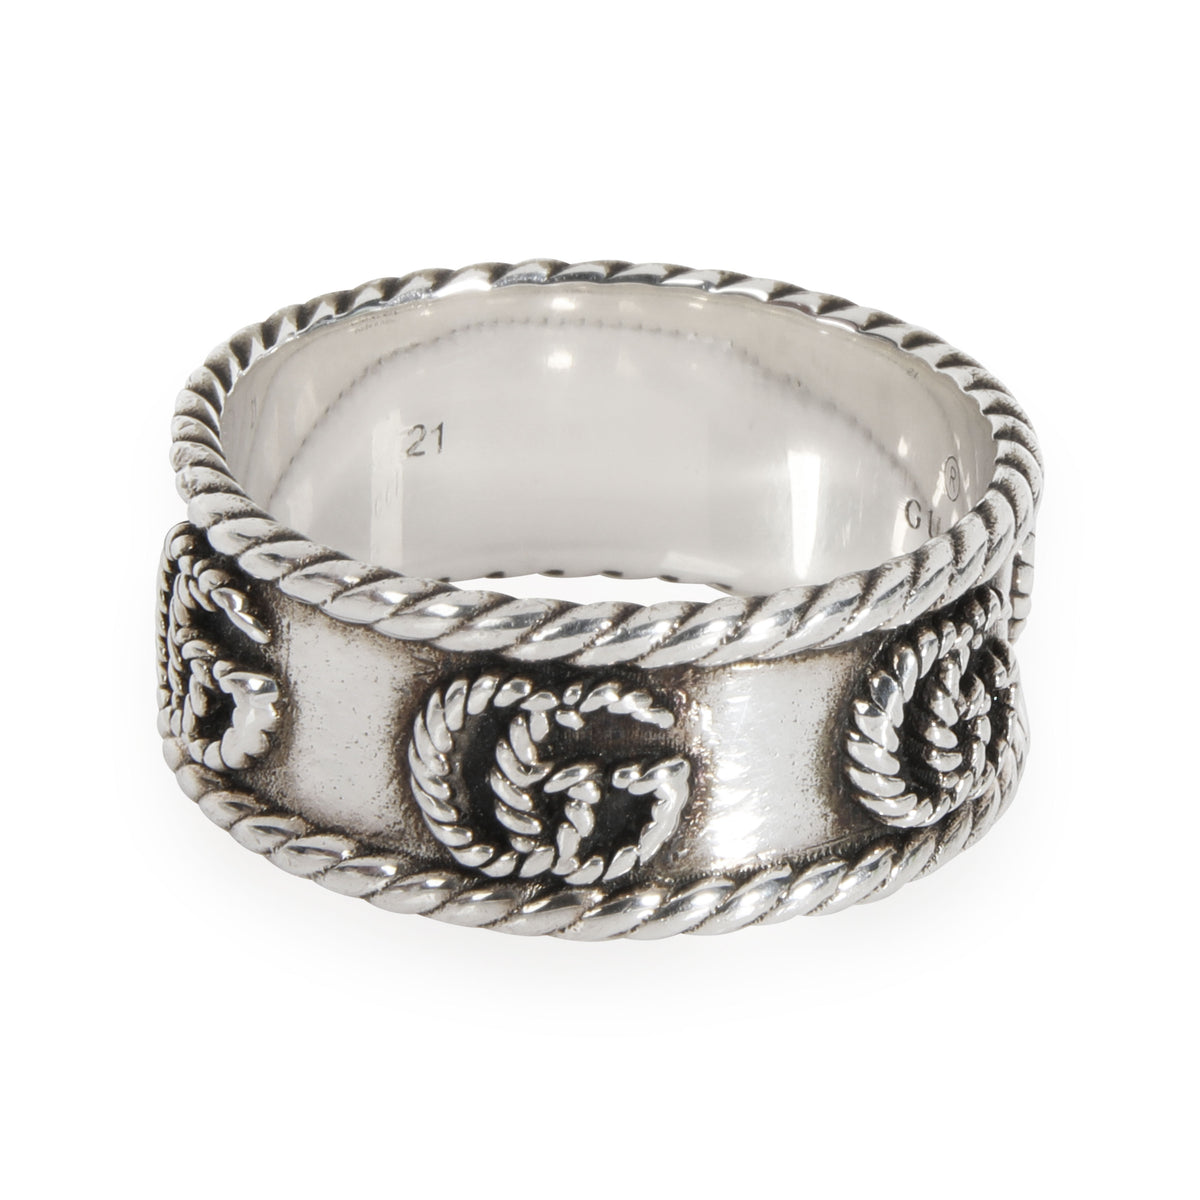 Gucci Marmont Logo Band in  Sterling Silver